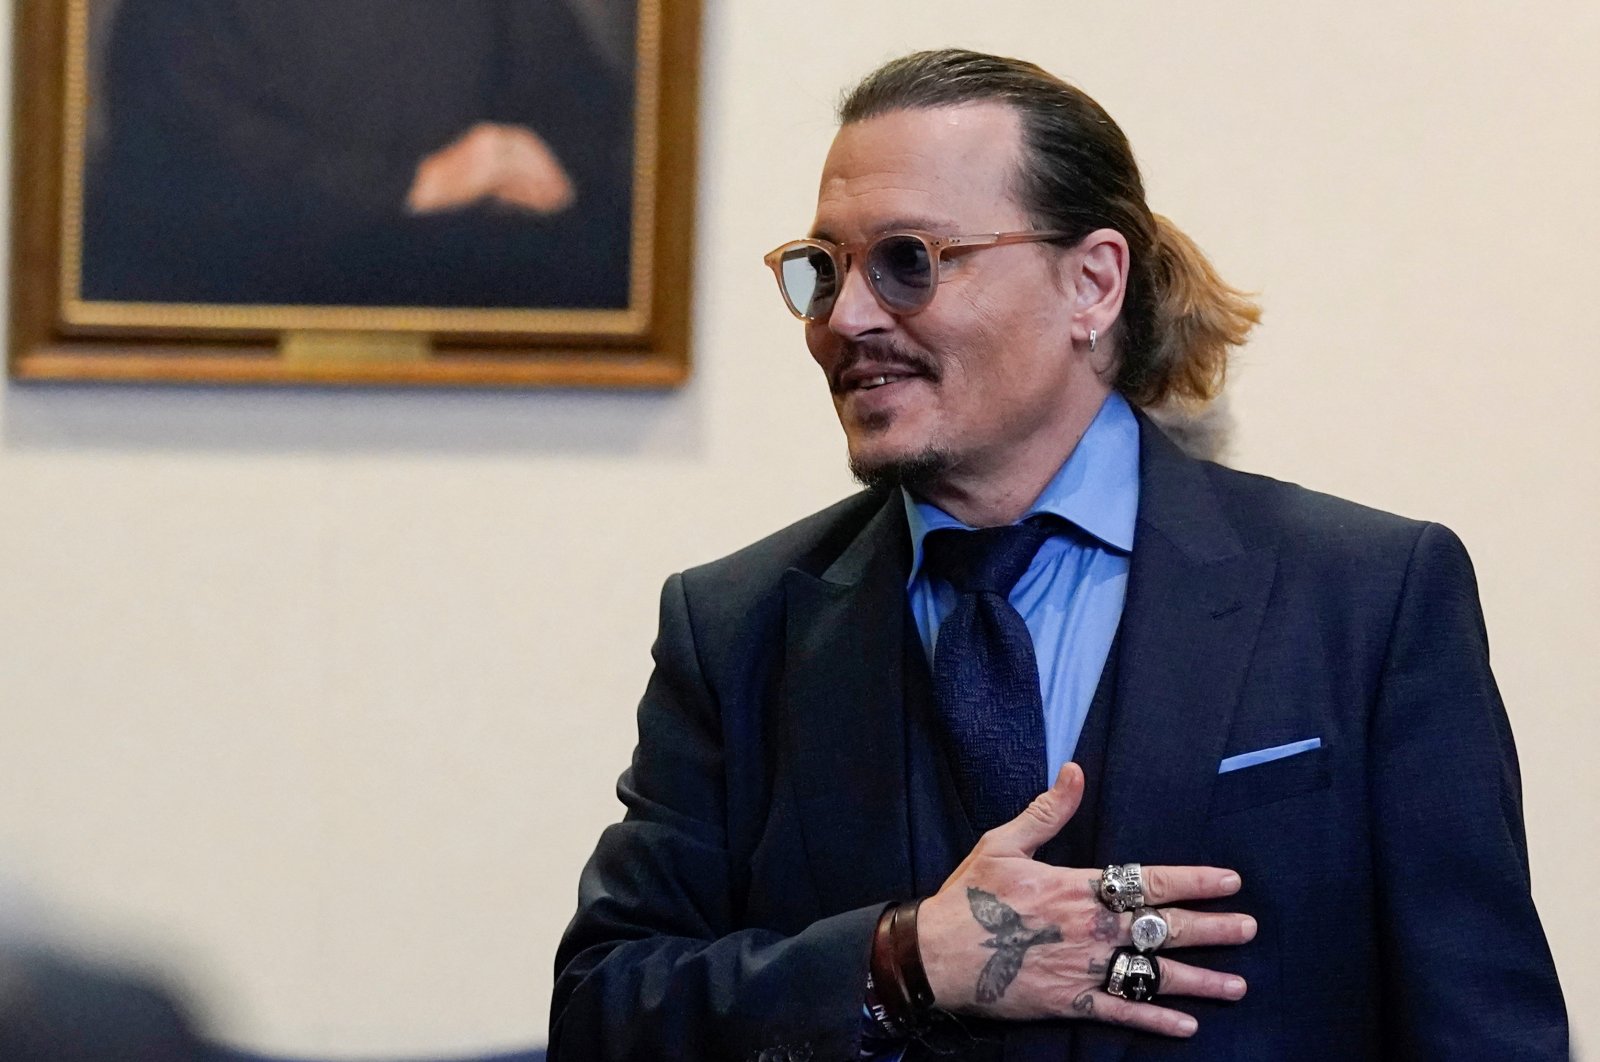 Actor Johnny Depp gestures to spectators in court after closing arguments during his defamation case against ex-wife Amber Heard at the Fairfax County Circuit Courthouse in Fairfax, Virginia, U.S., May 27, 2022. (REUTERS)